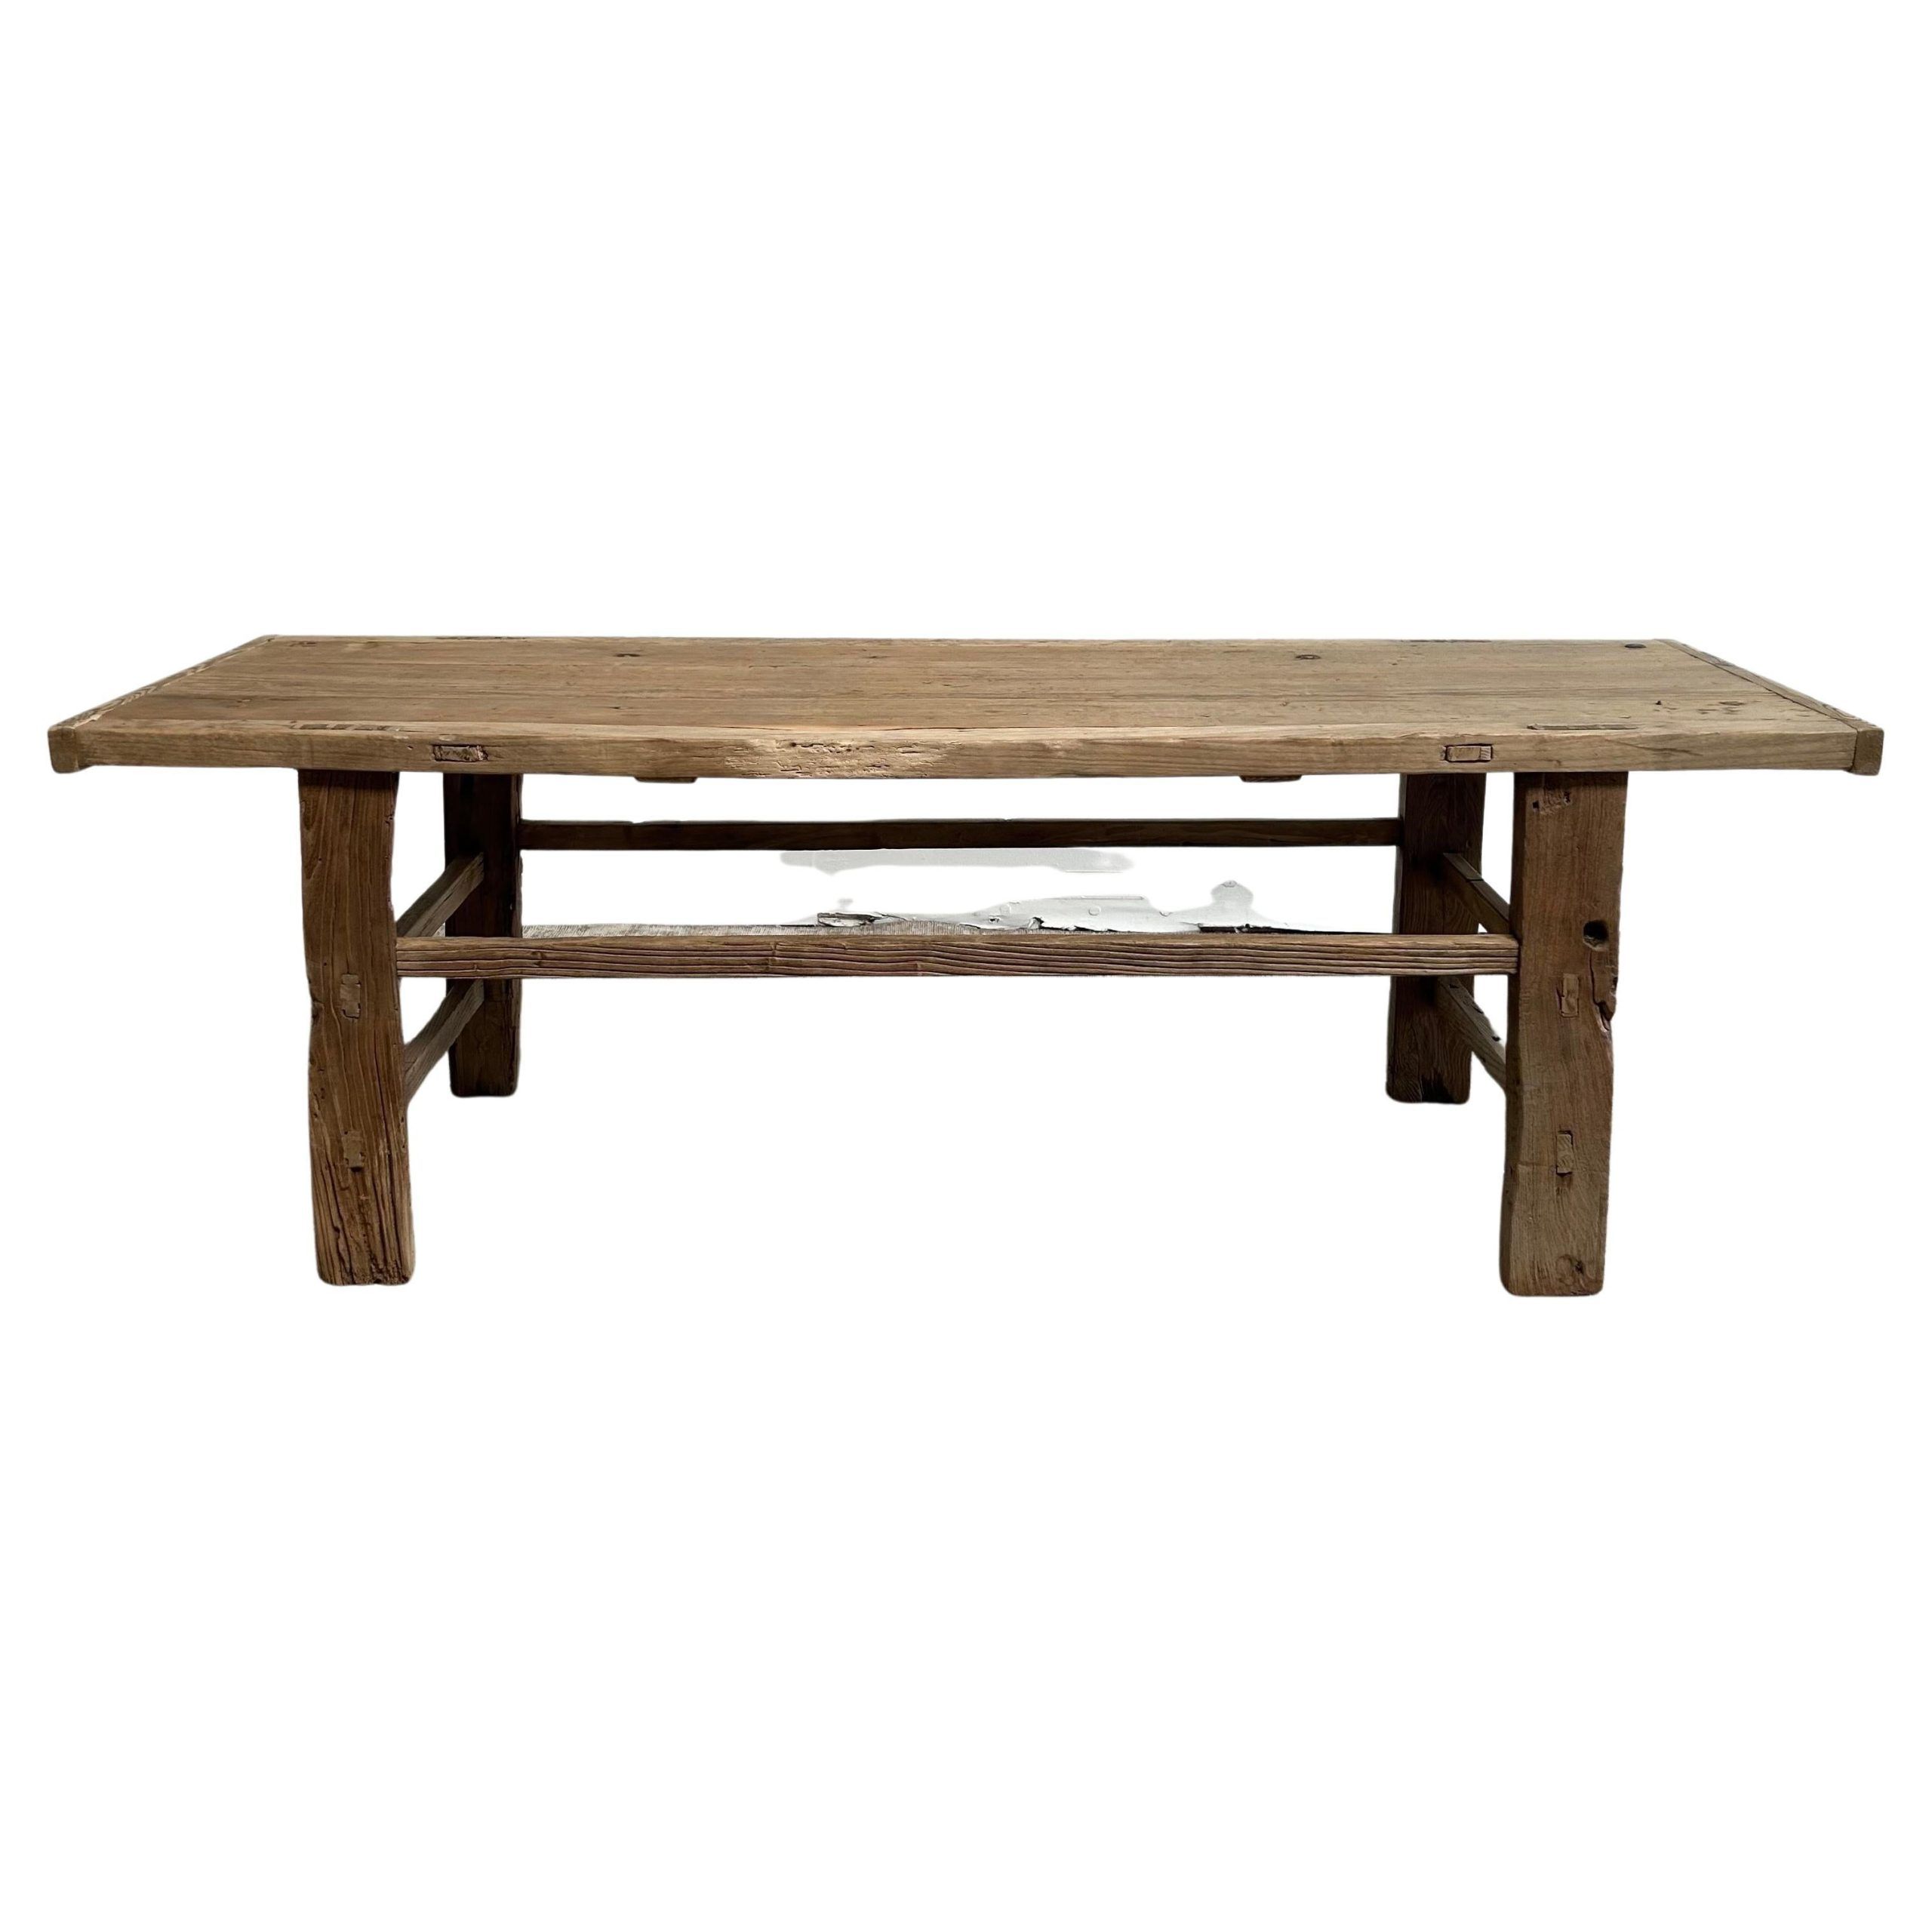 Vintage Reclaimed Elm Wood Coffee Table At 1stdibs With Regard To Pemberly Row Replicated Wood Coffee Tables (View 18 of 20)